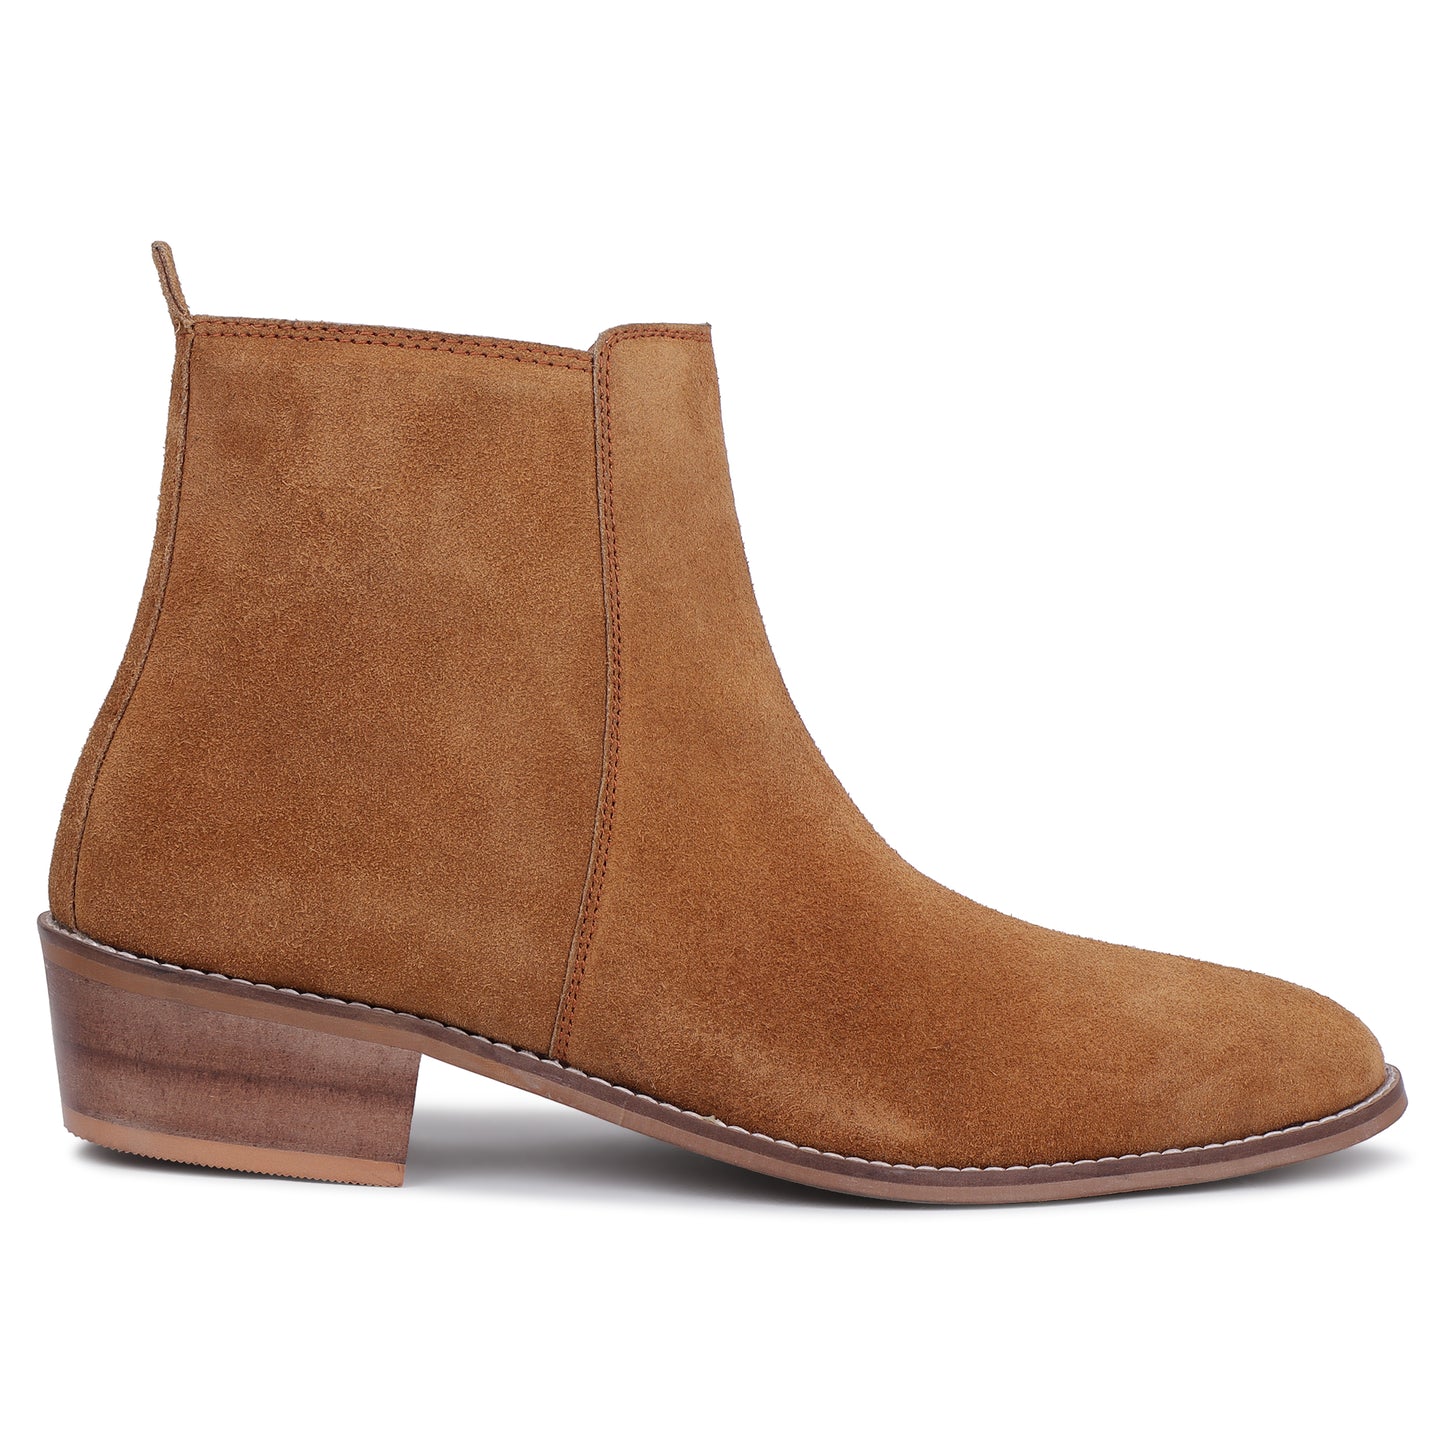 Suede Leather Cuban Heel Boots - Tan